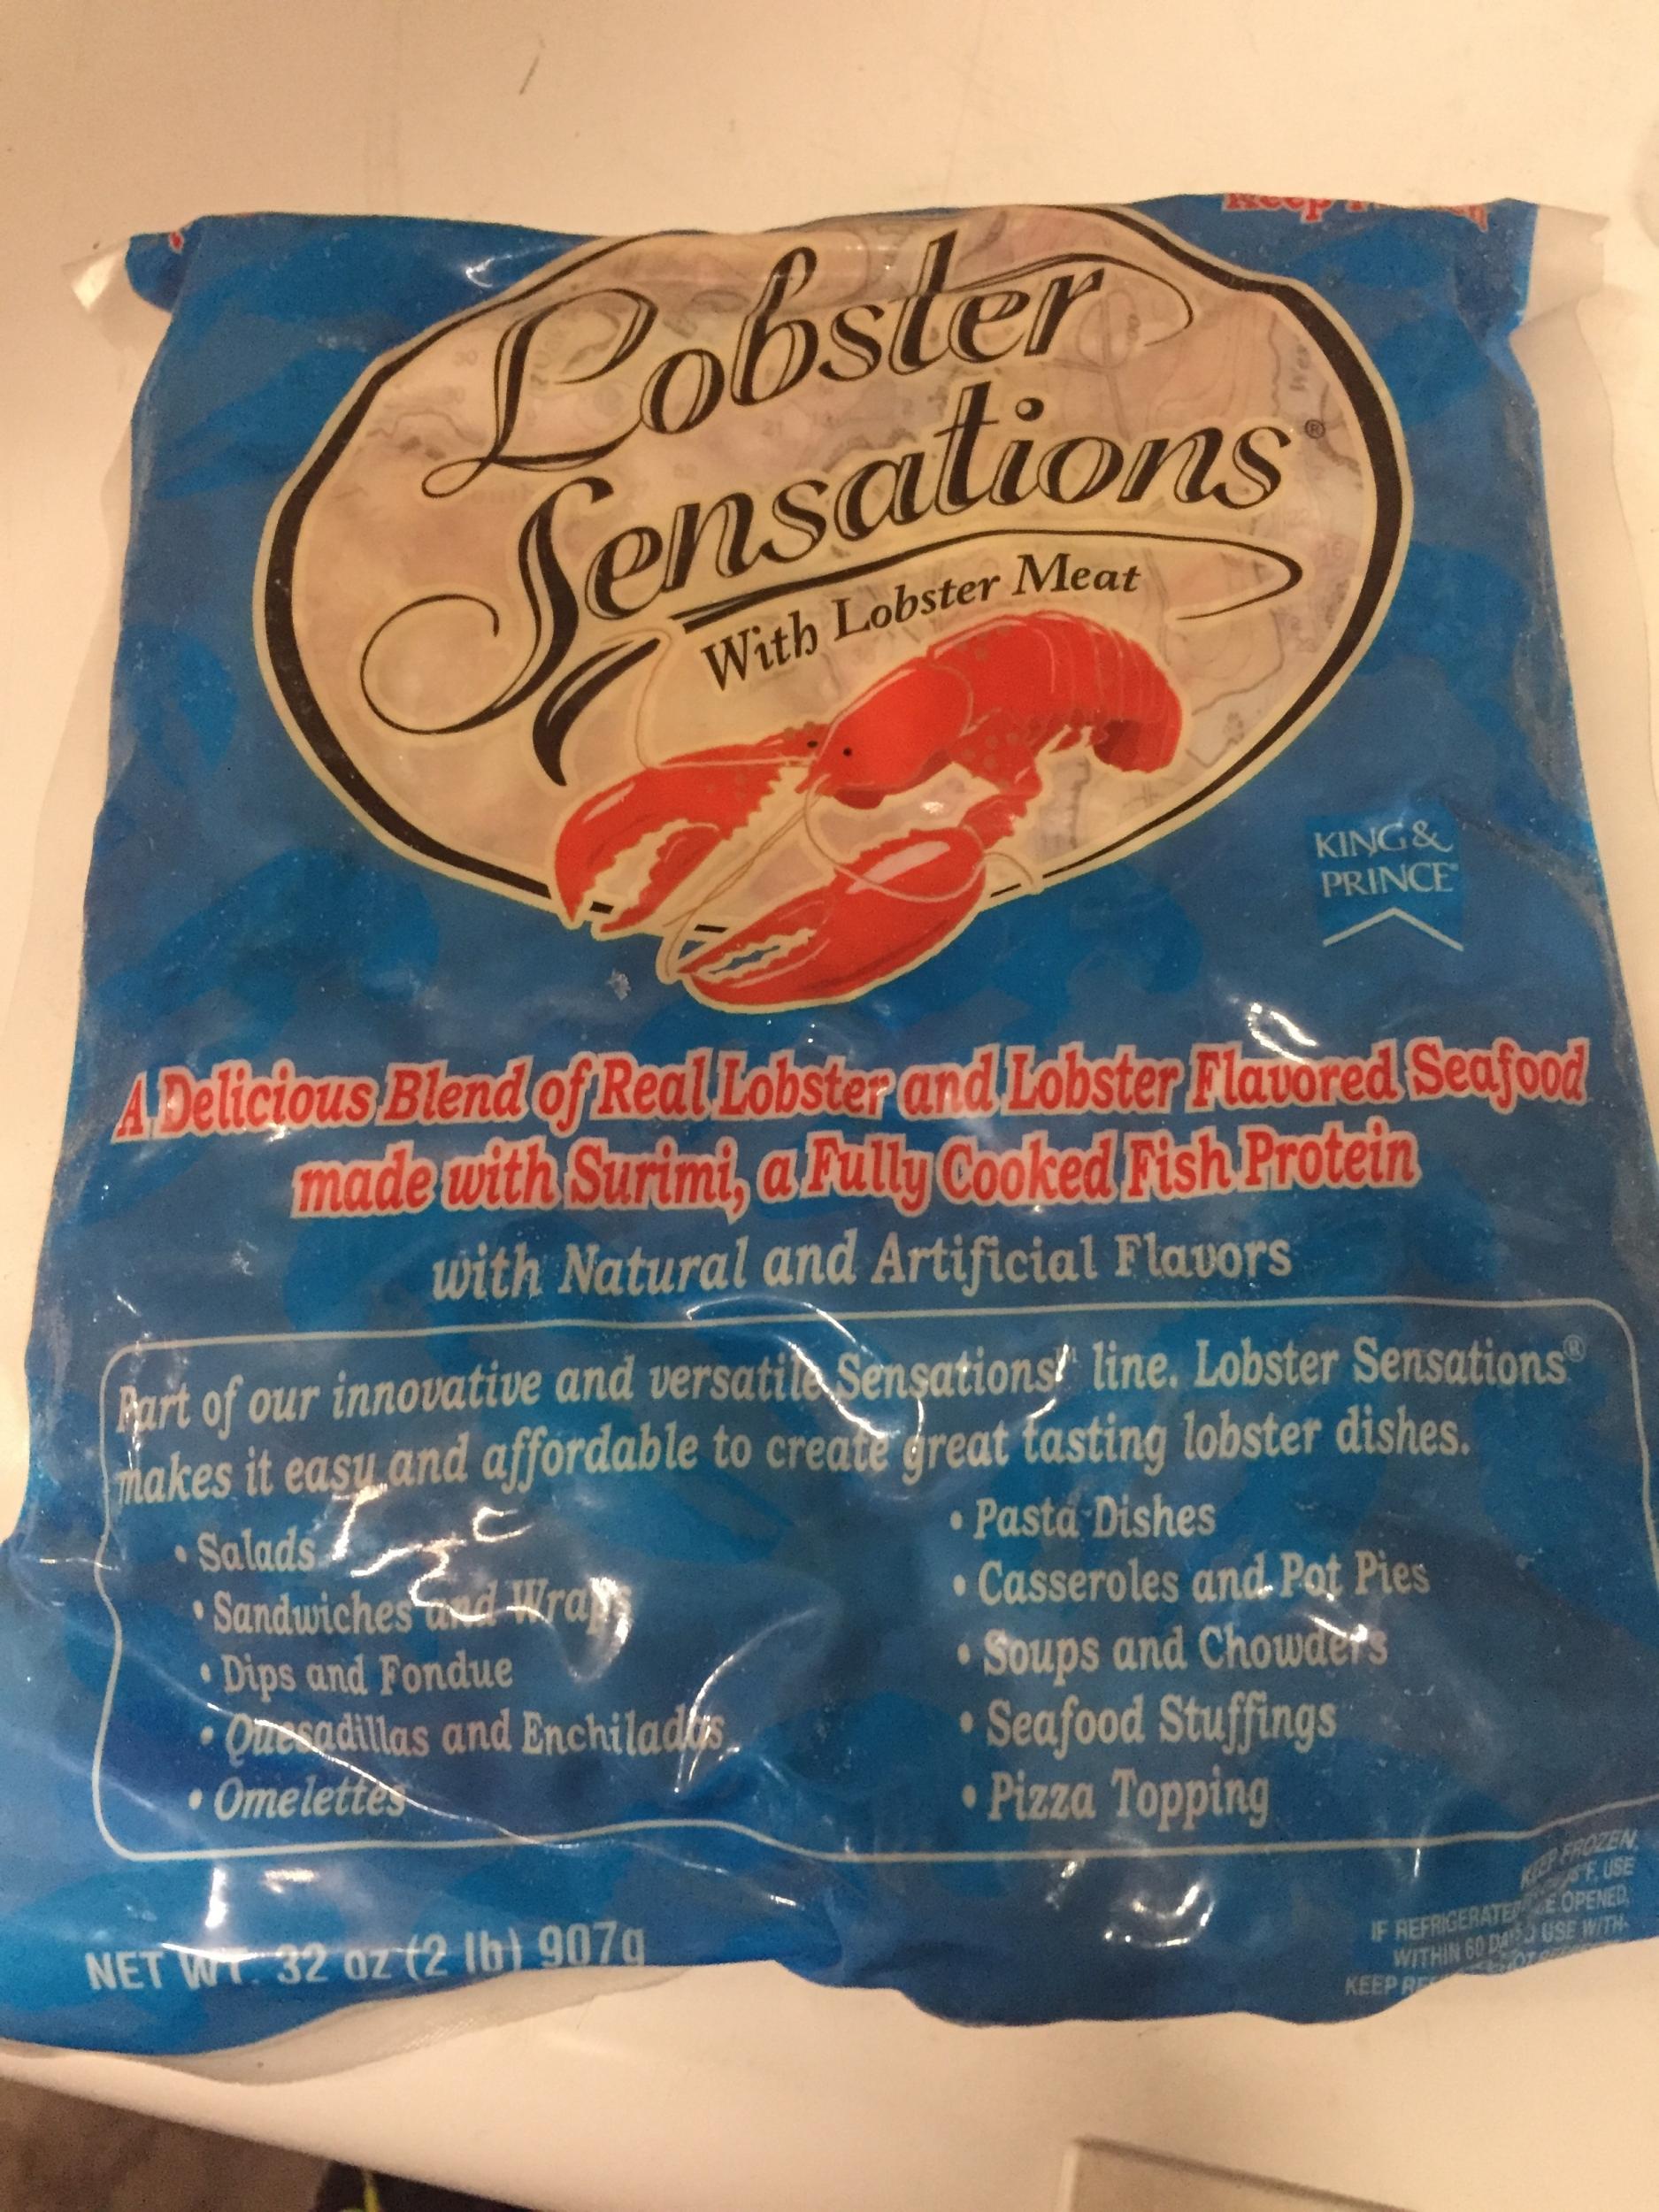 The Ask dish was made using frozen ‘Lobster Sensations’